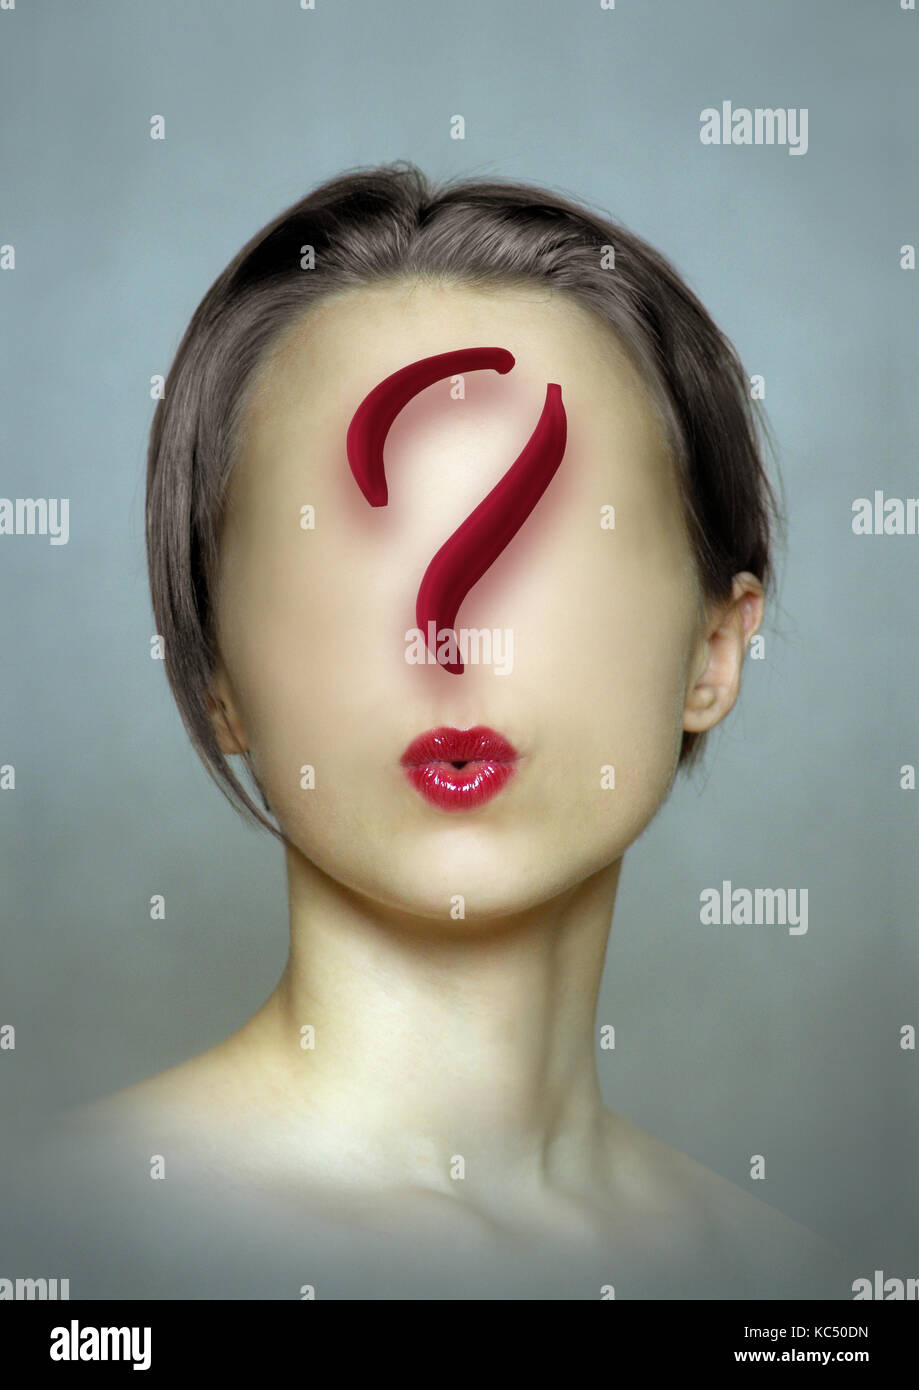 A faceless woman with a question mark instead of facial features as a question of identity Stock Photo